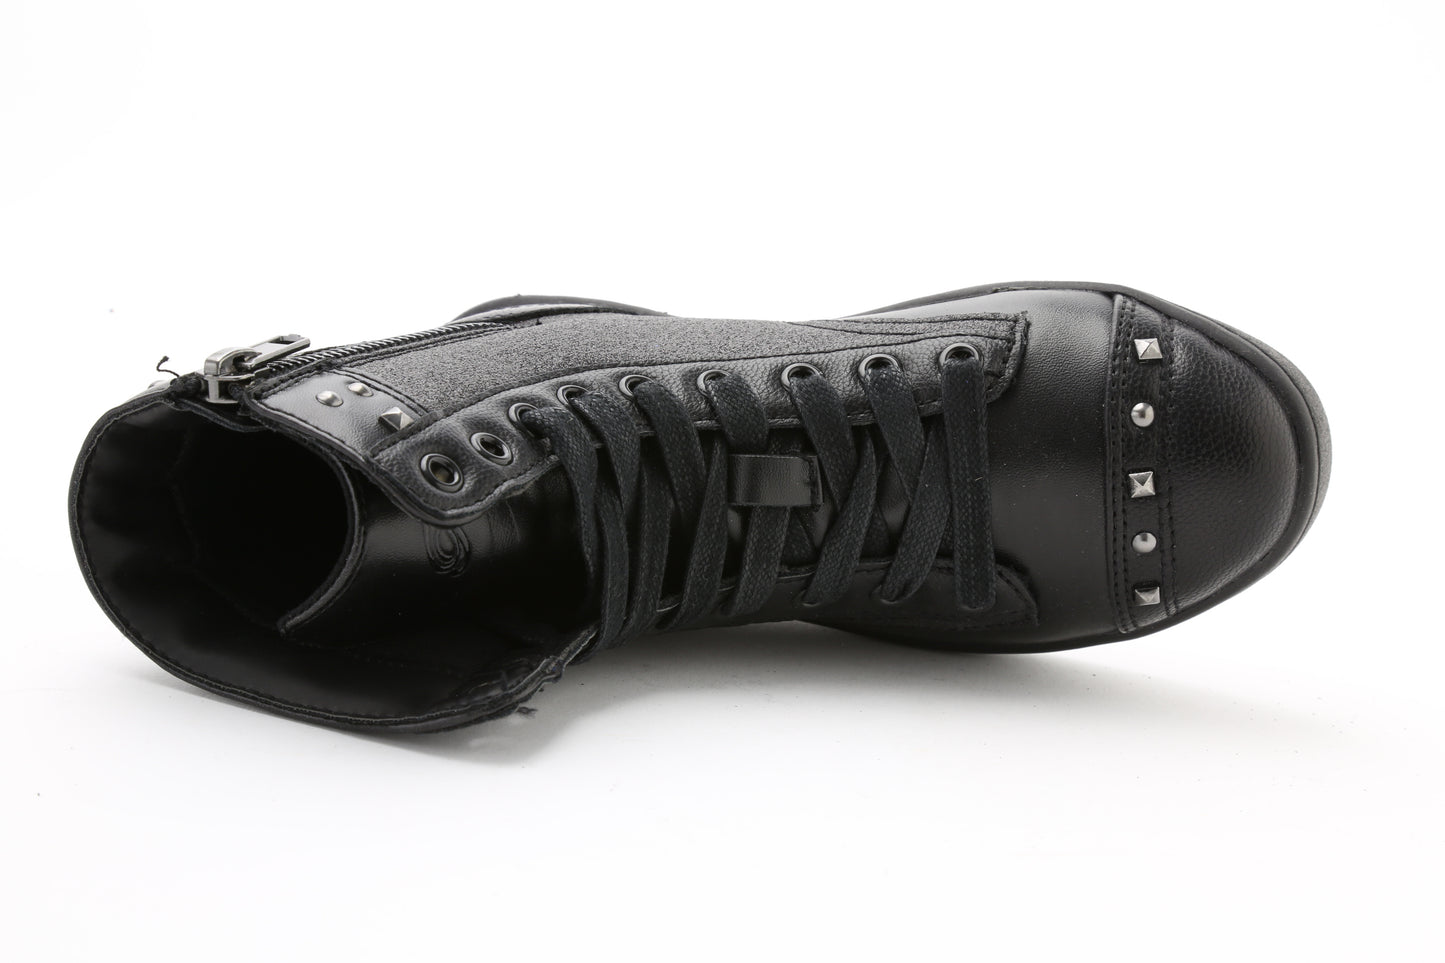 Pastry Military Glitz Youth Sneaker Boot in Black/Black top view